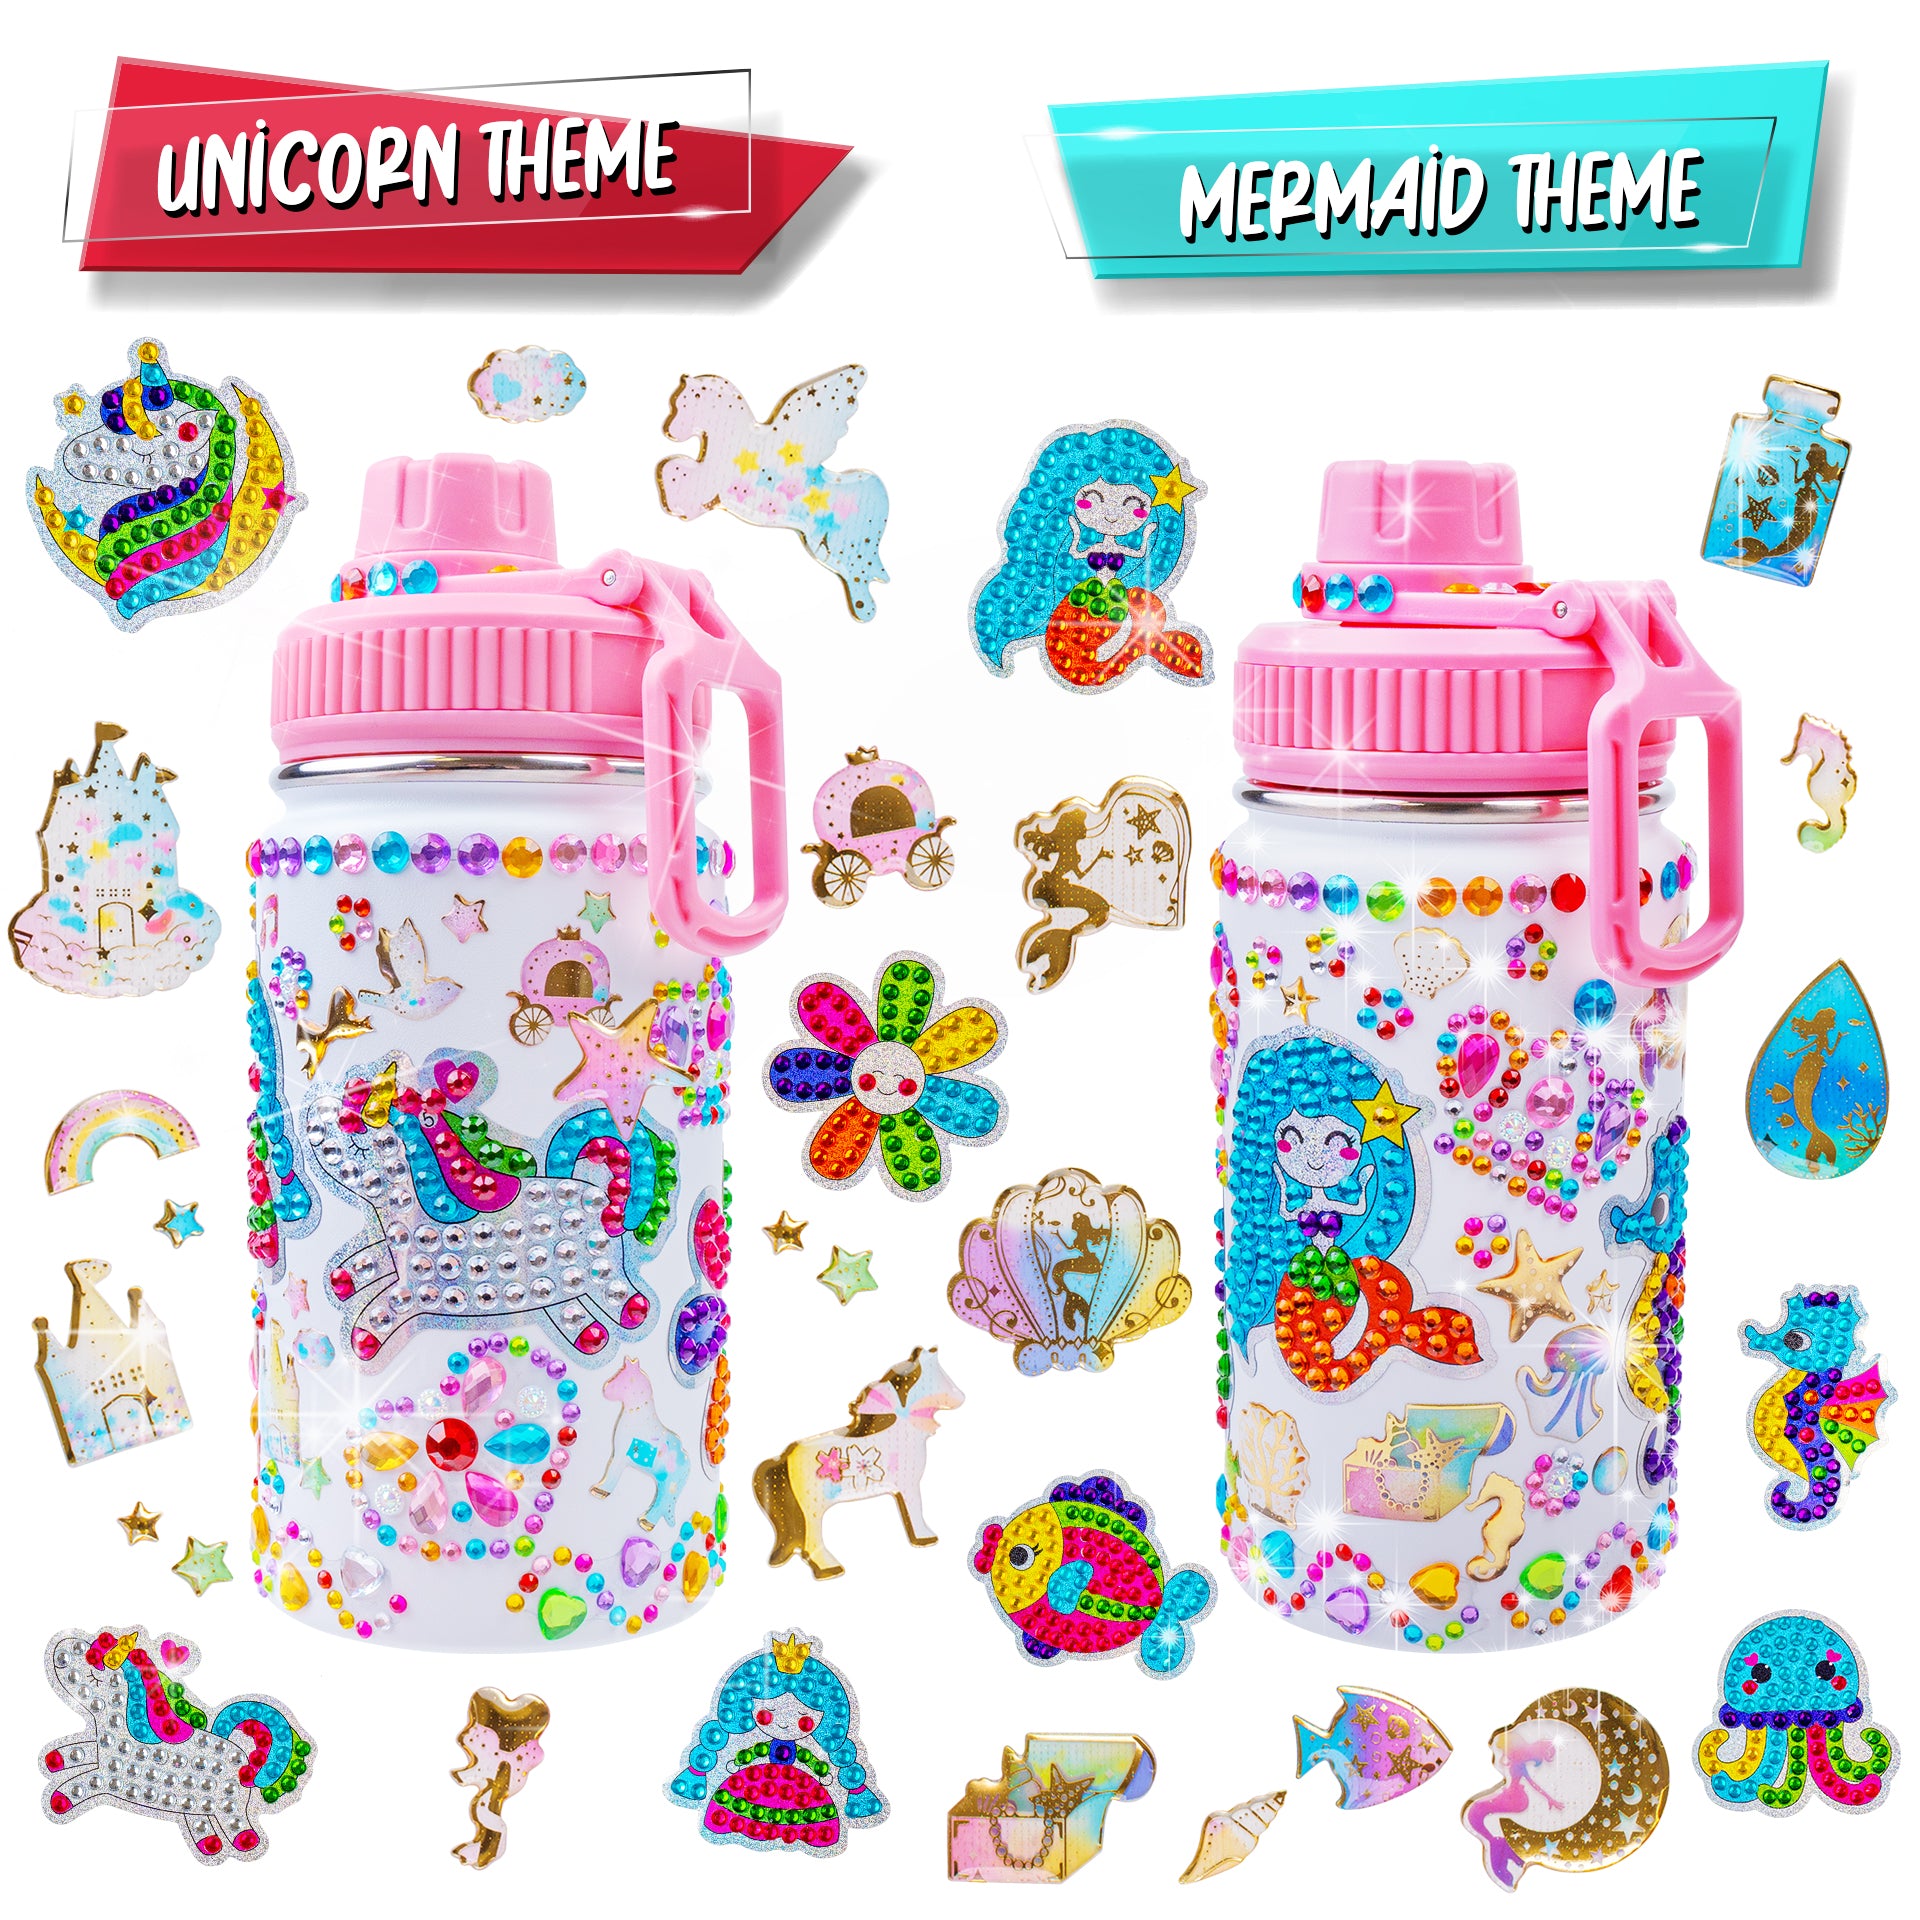  EDsportshouse Decorate Your Own Water Bottle Kits for Girls Age  4-6-8-10,Mermaid Gem Diamond Painting Crafts,Fun Arts and Crafts Gifts Toys  for Girls Birthday Christmas(Mermaid) : Toys & Games